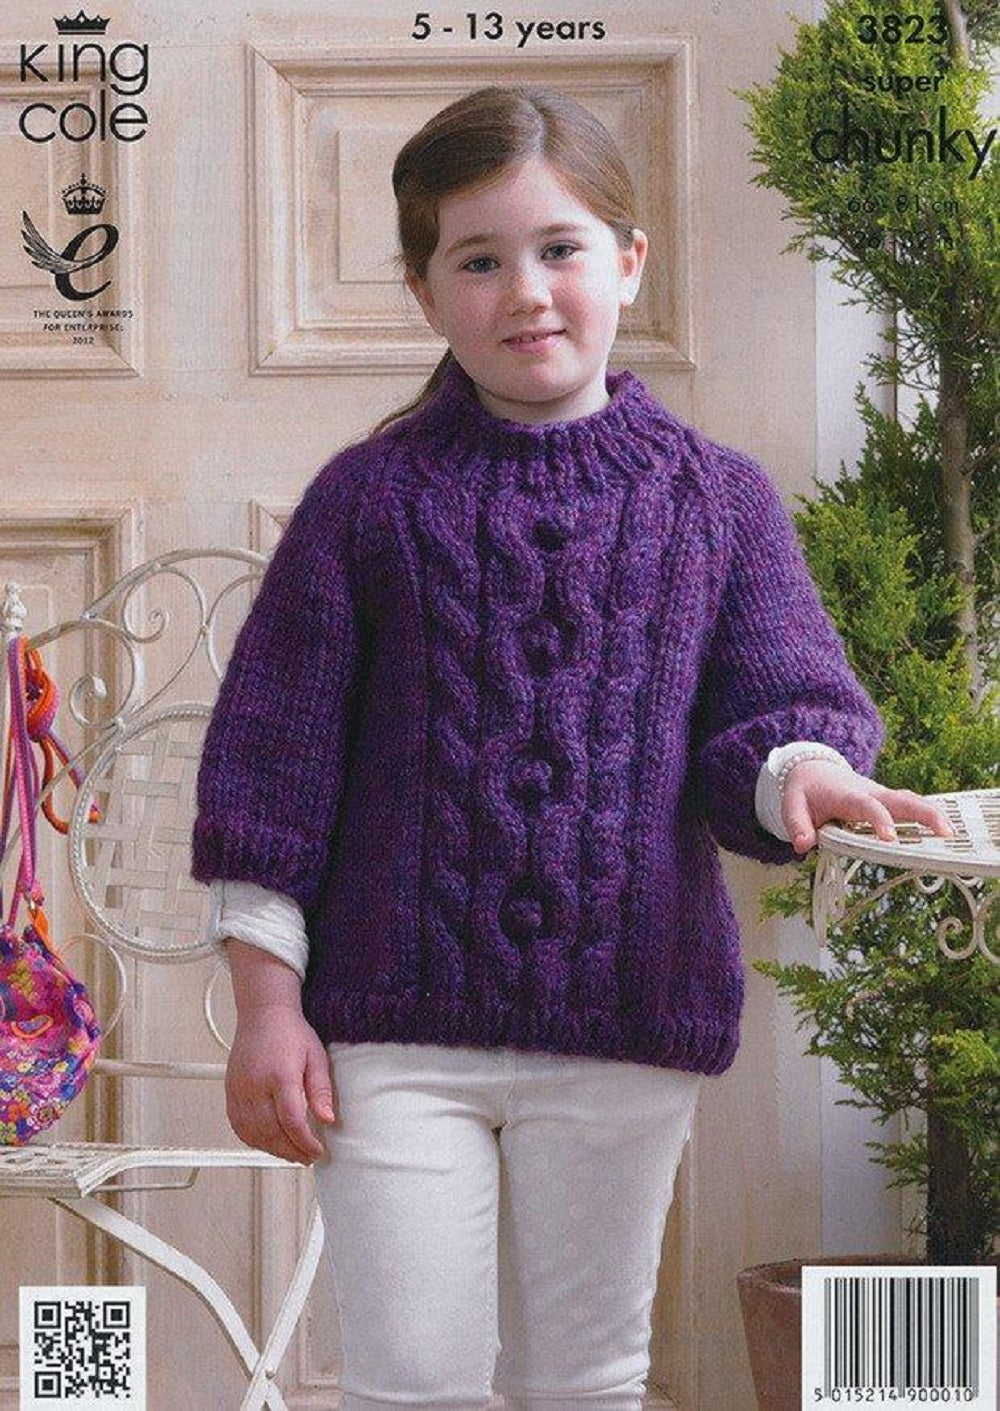 King Cole 3823 Super Chunky Childs Cape Sweater Knitting Pattern